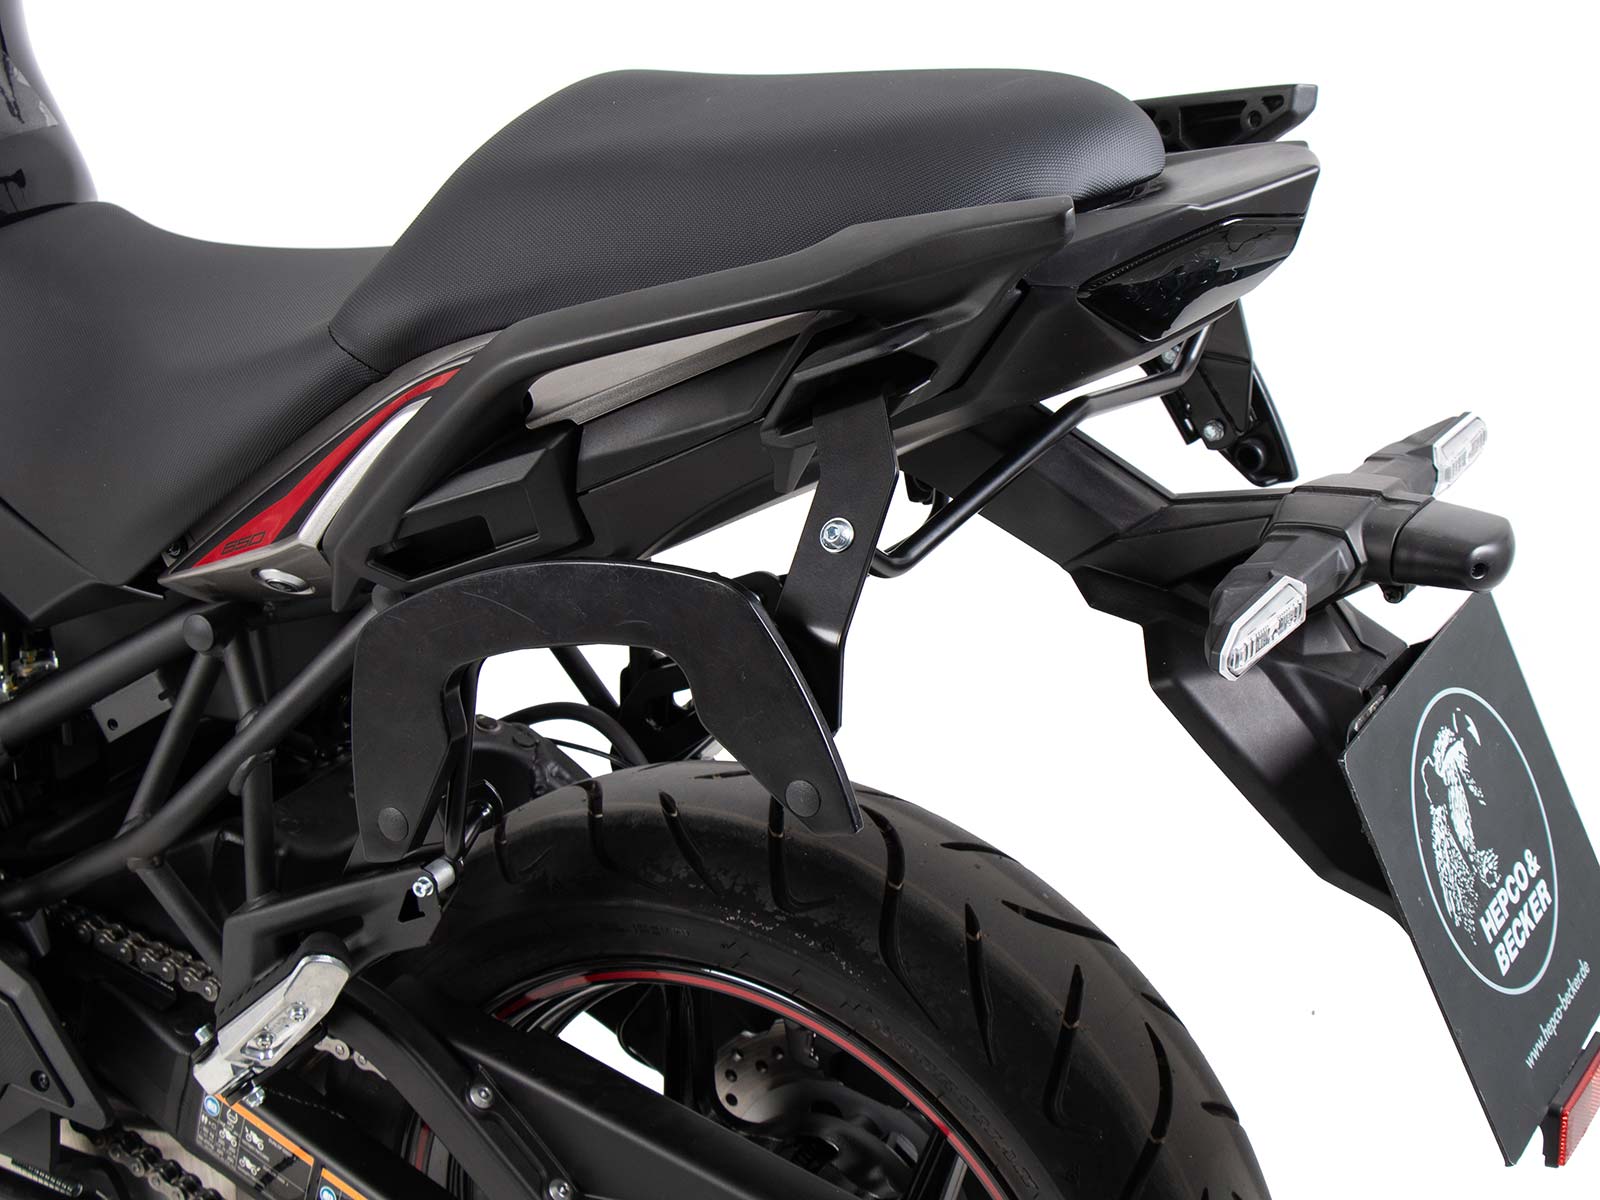 C-Bow sidecarrier for Kawasaki Versys 650 (2015-2021)